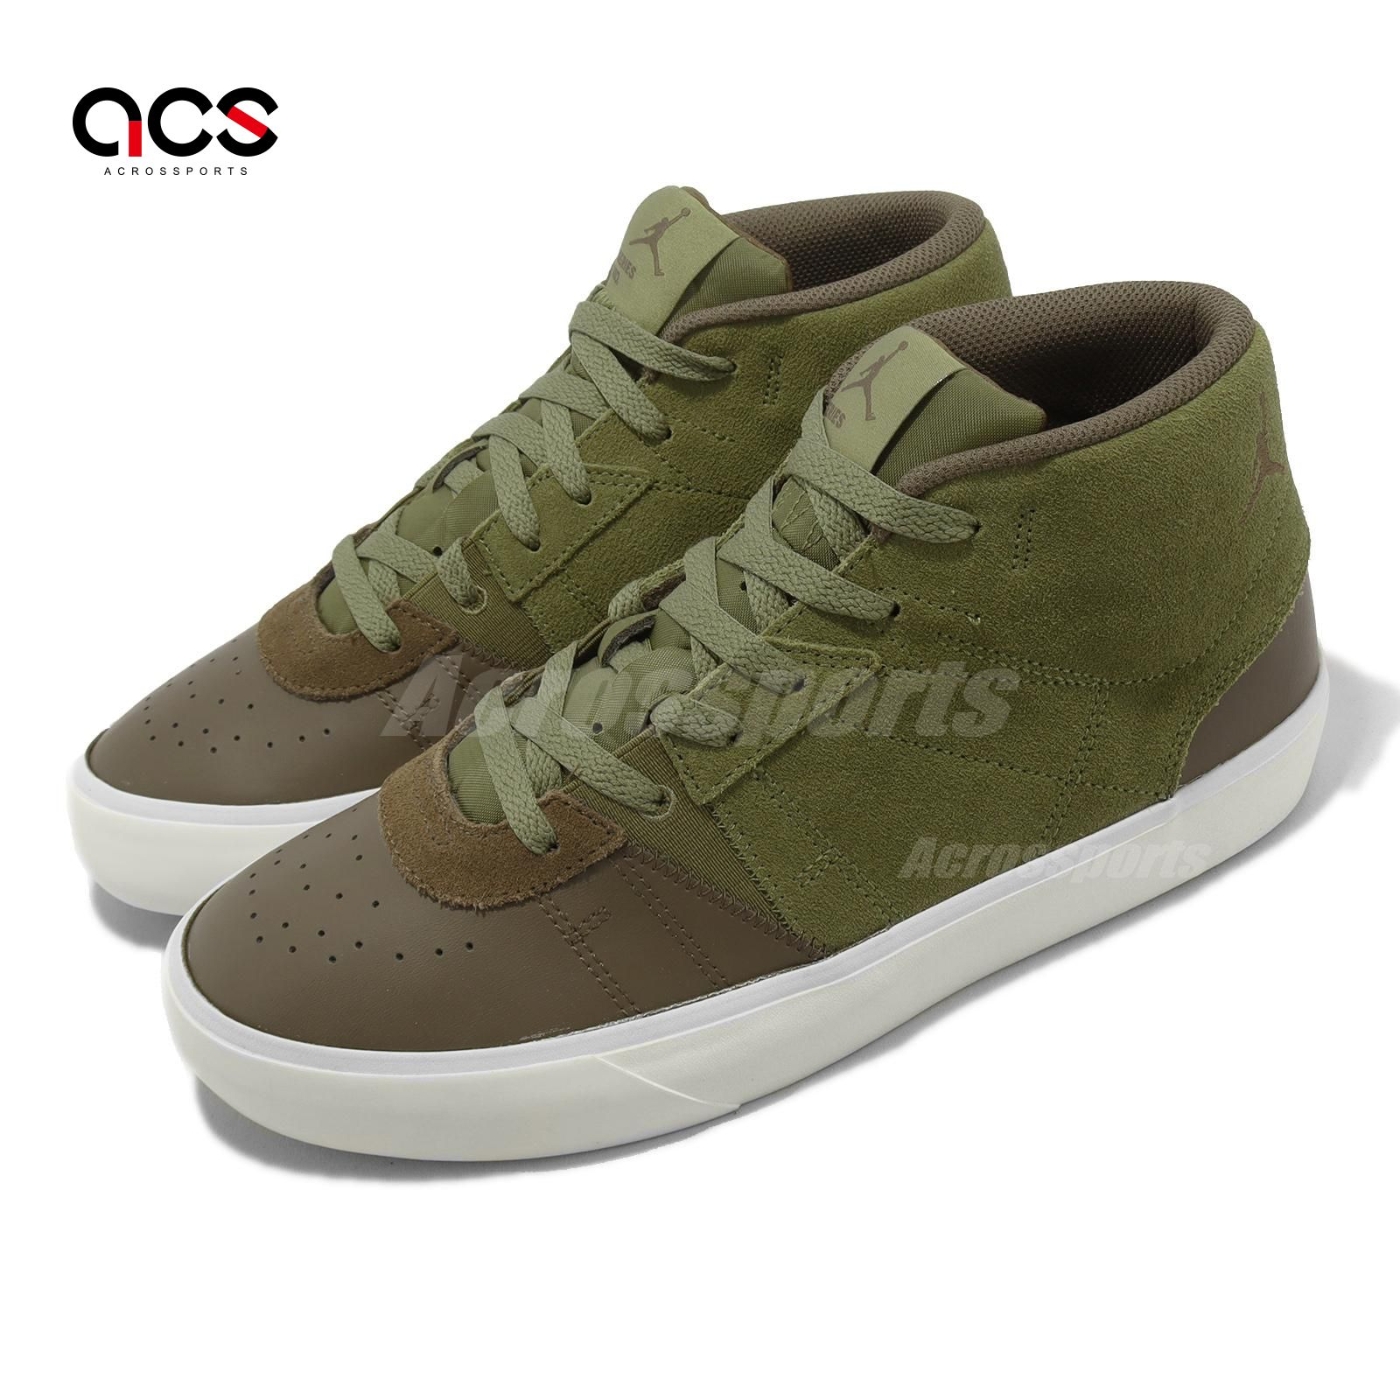 DM1058 - 200 - mint green and white nike shoes sale girls - RvceShops | nike  liteforce iii mid olive sneakers boots sale 'Safari'